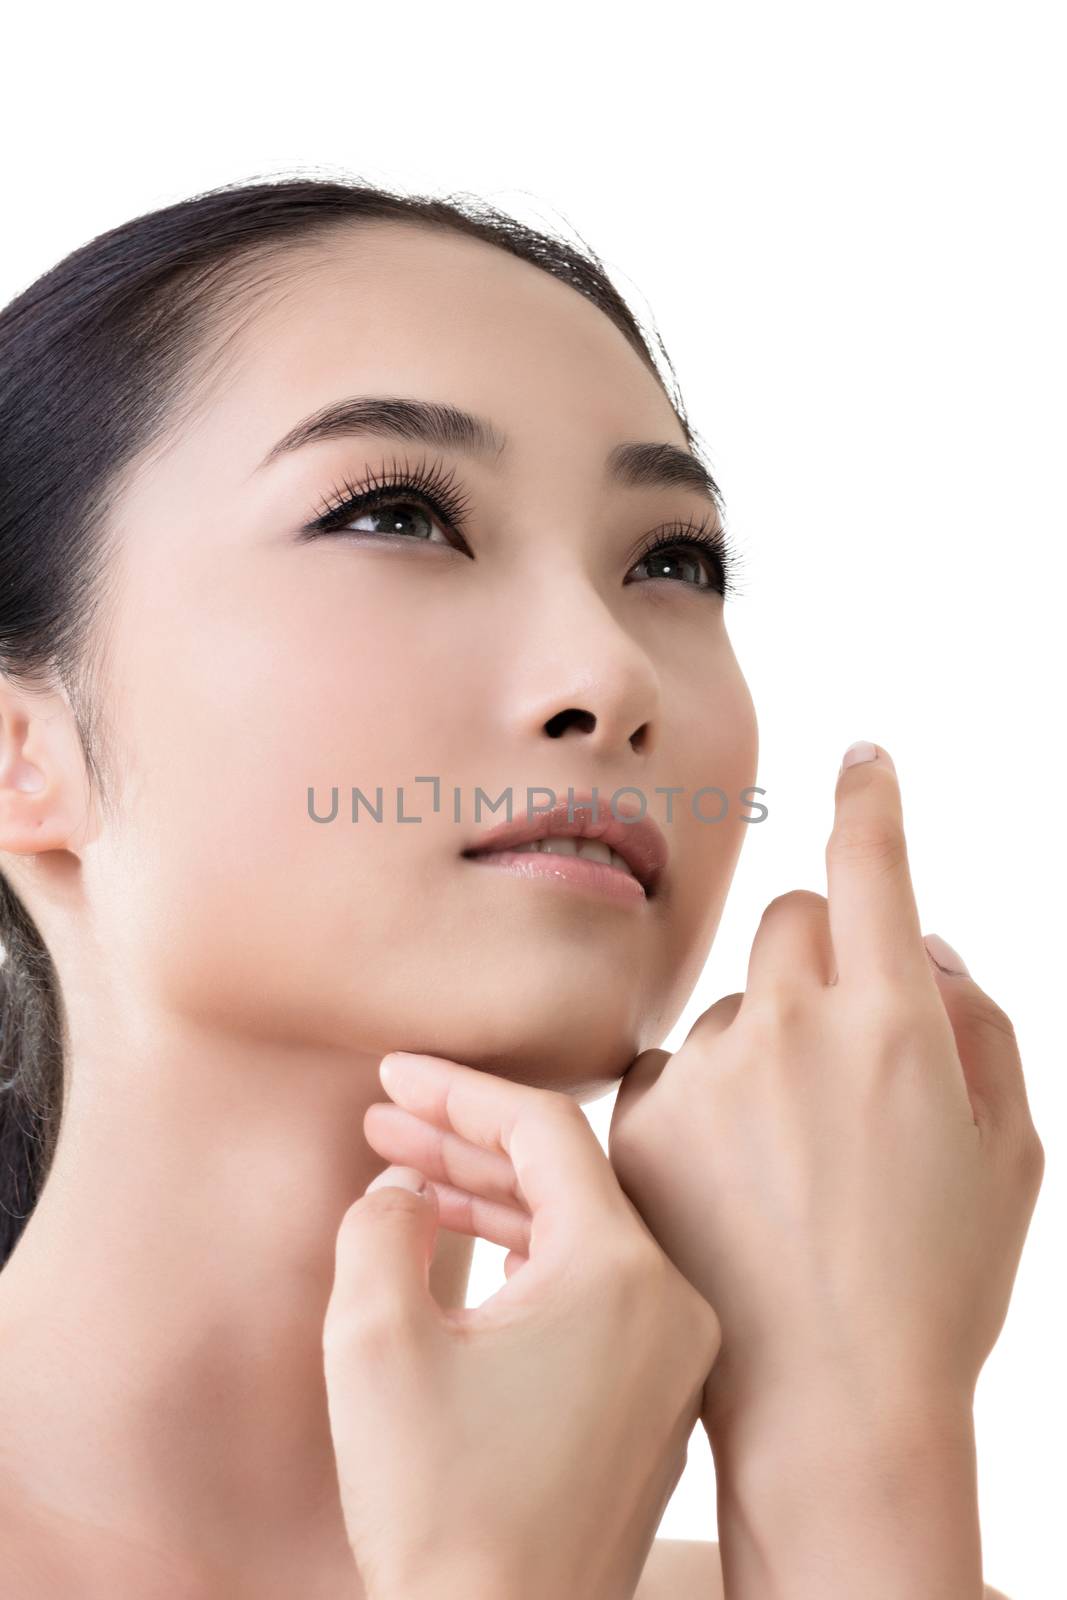 Asian beauty face, closeup portrait with clean and fresh elegant lady.